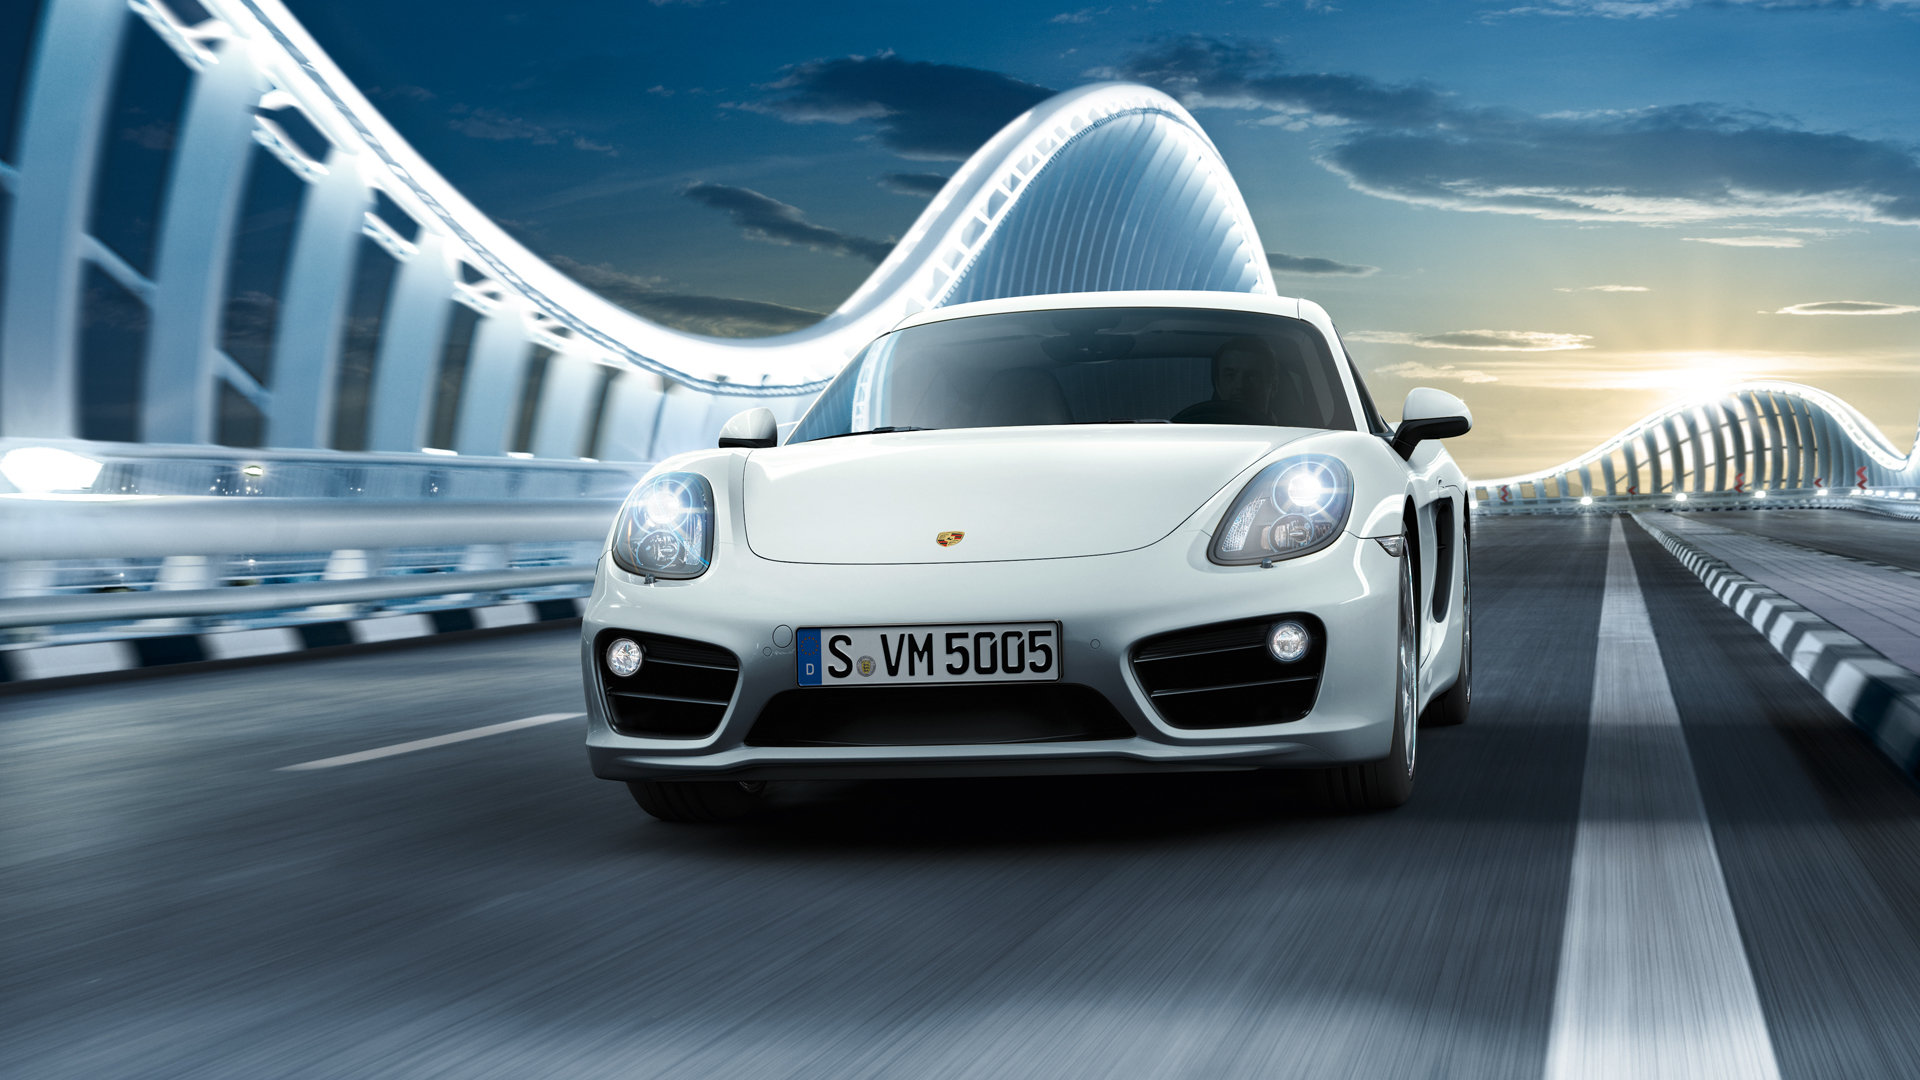 Awesome Porsche Cayman S free wallpaper ID:365870 for full hd 1080p desktop